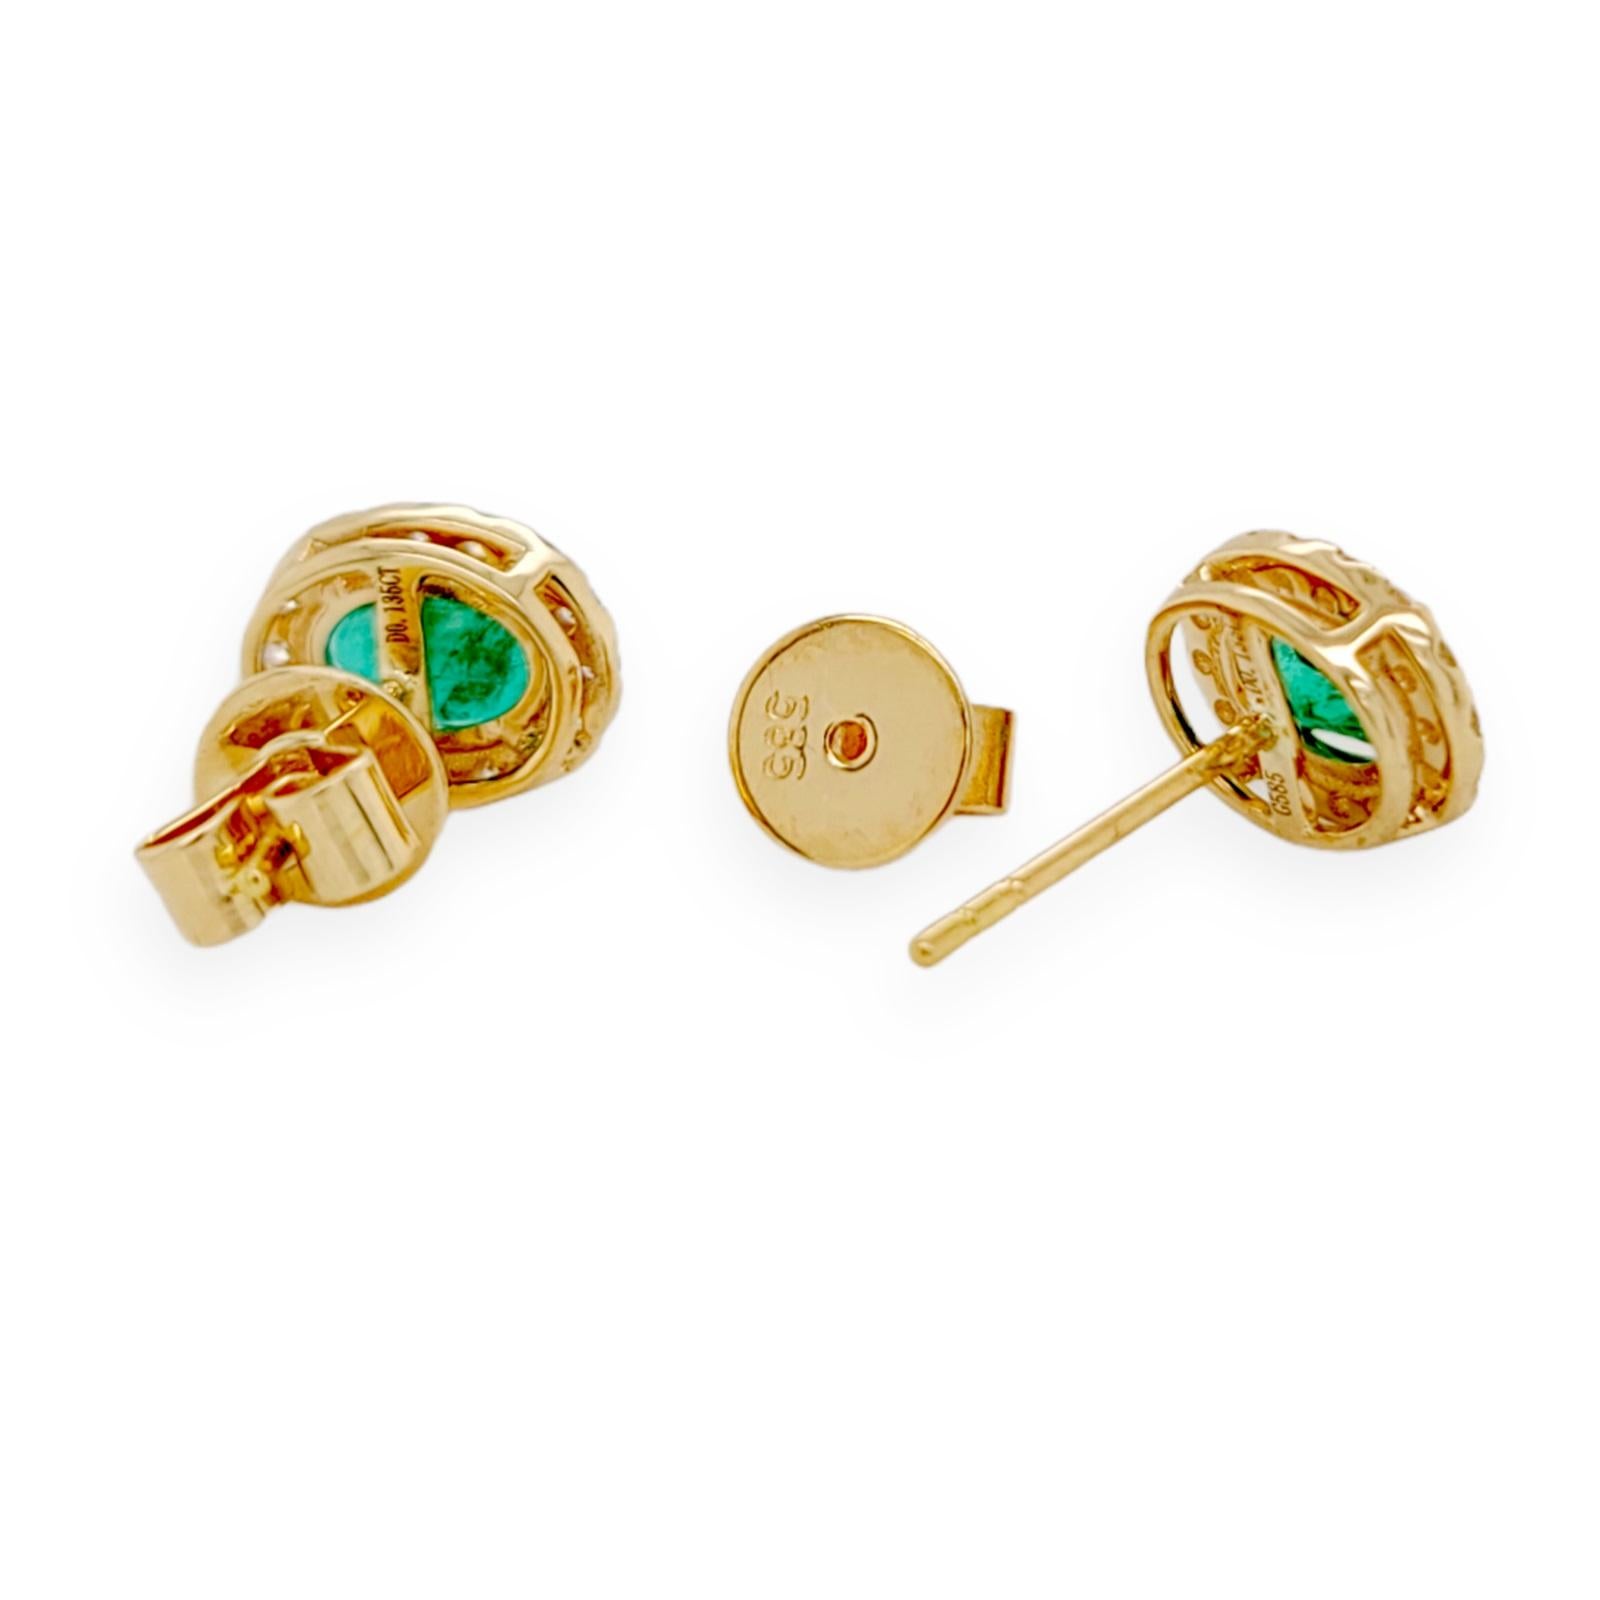 0.88 CT Colombian Emerald & 0.27 CT Diamonds in 14K Yellow Gold Stud Earrings For Sale 1